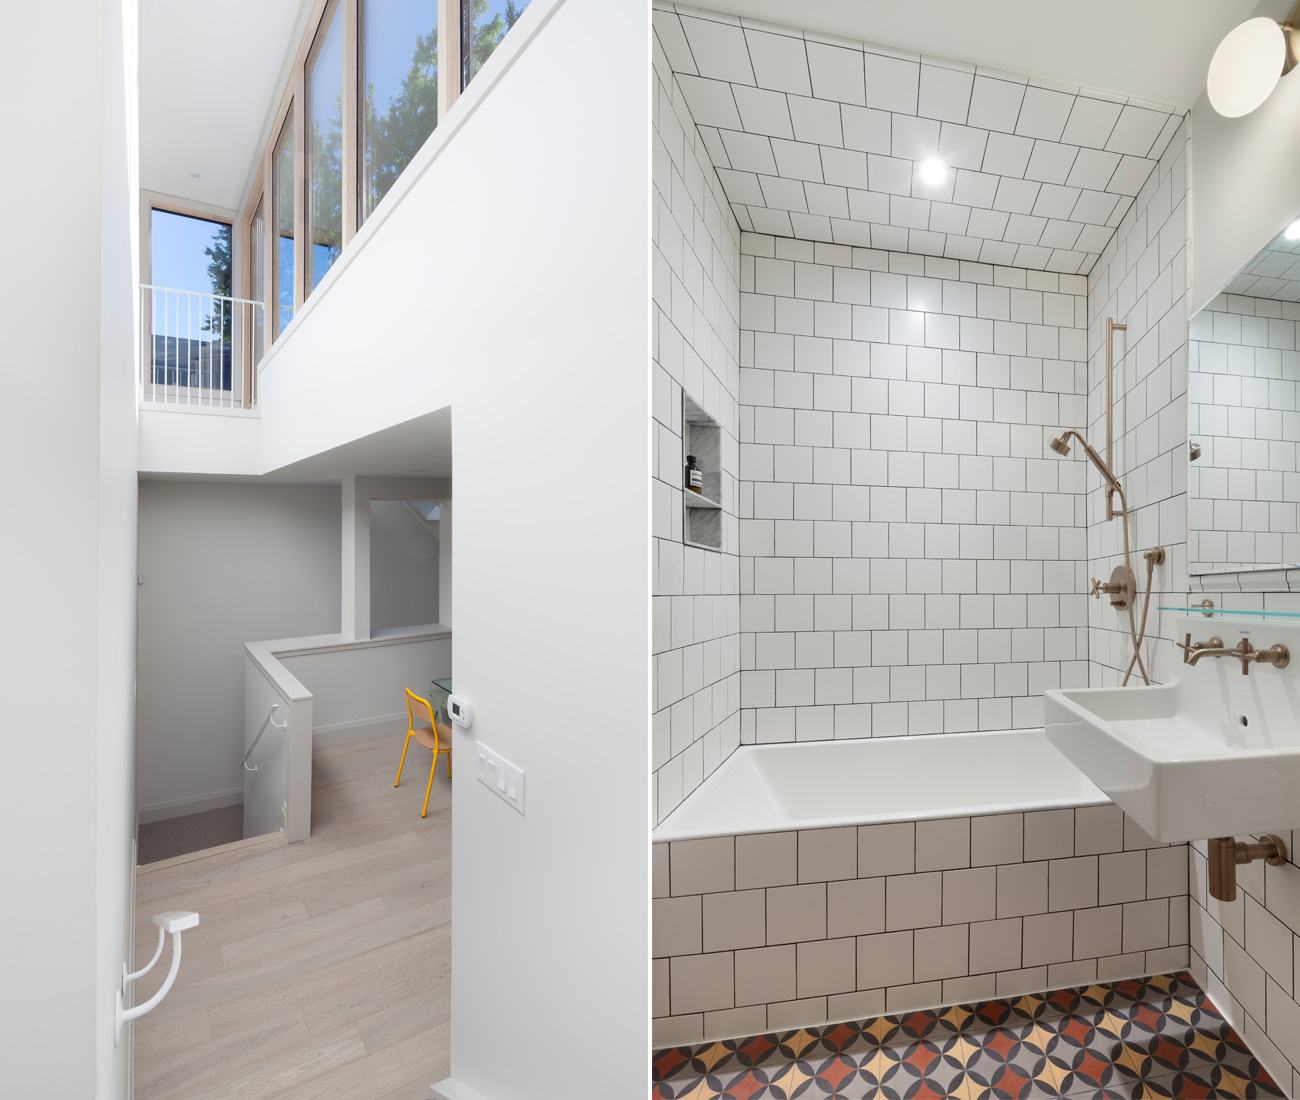 Left: A soaring atrium opens to the third storey, with western light pouring in from a full wall of windows from Torp. Right: Formerly a walk-in closet with half walls, the new bathroom features cement floor tiles by Clea and subway tile from Stone Tile. Sink by Duravit; shower by Kohler.